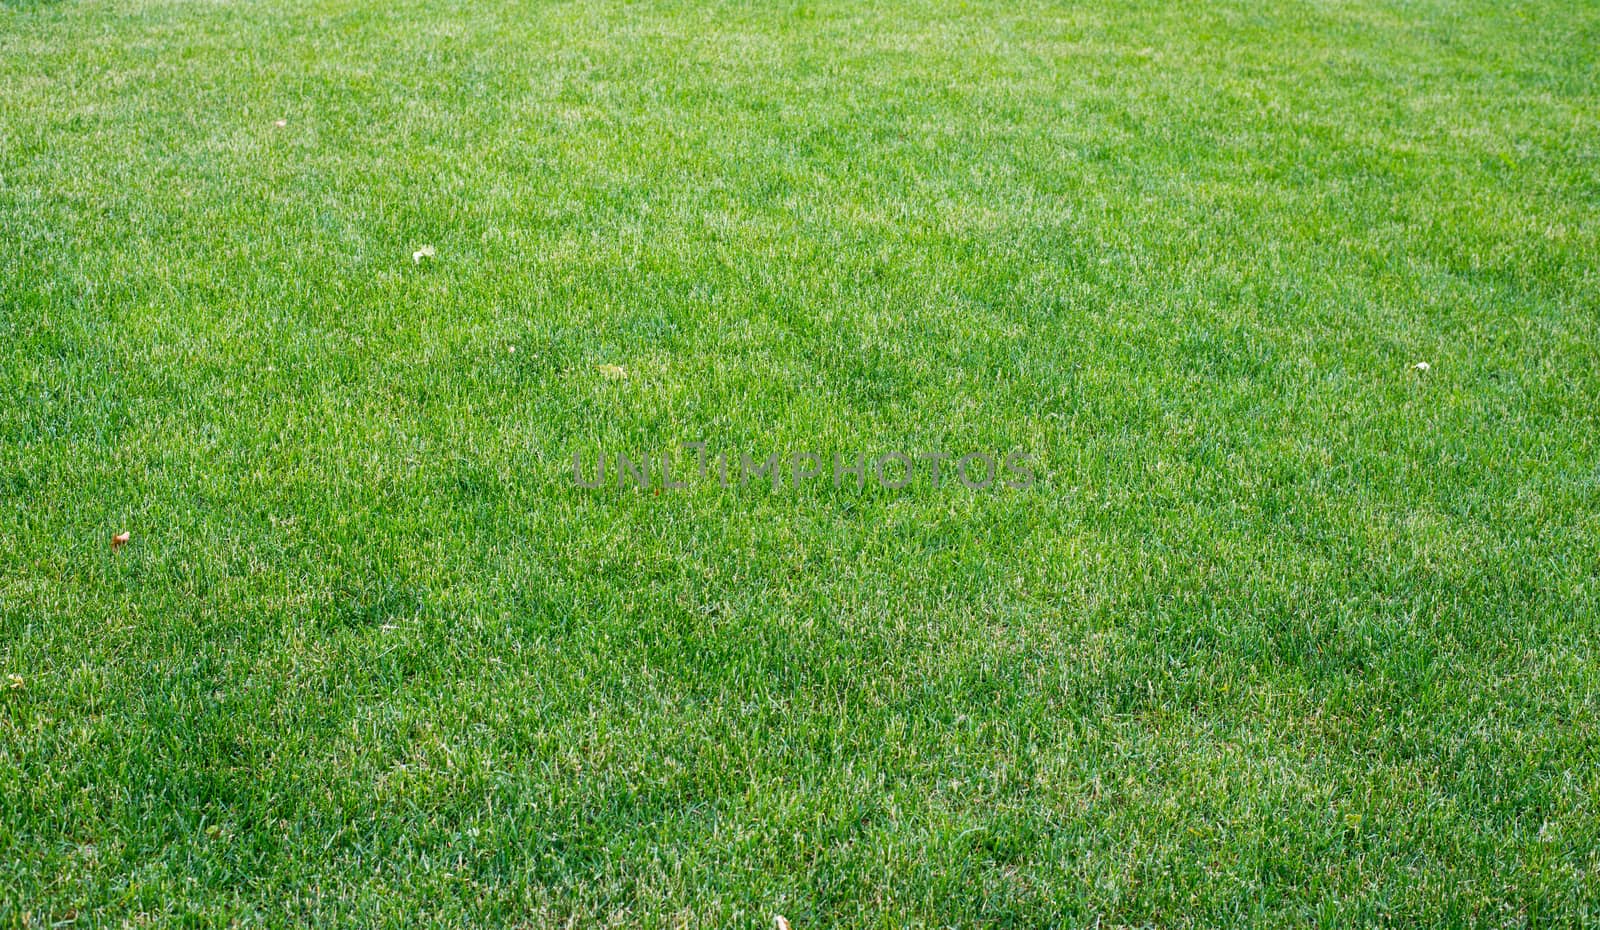 Green lawn with different plants, nature background. Close-up view